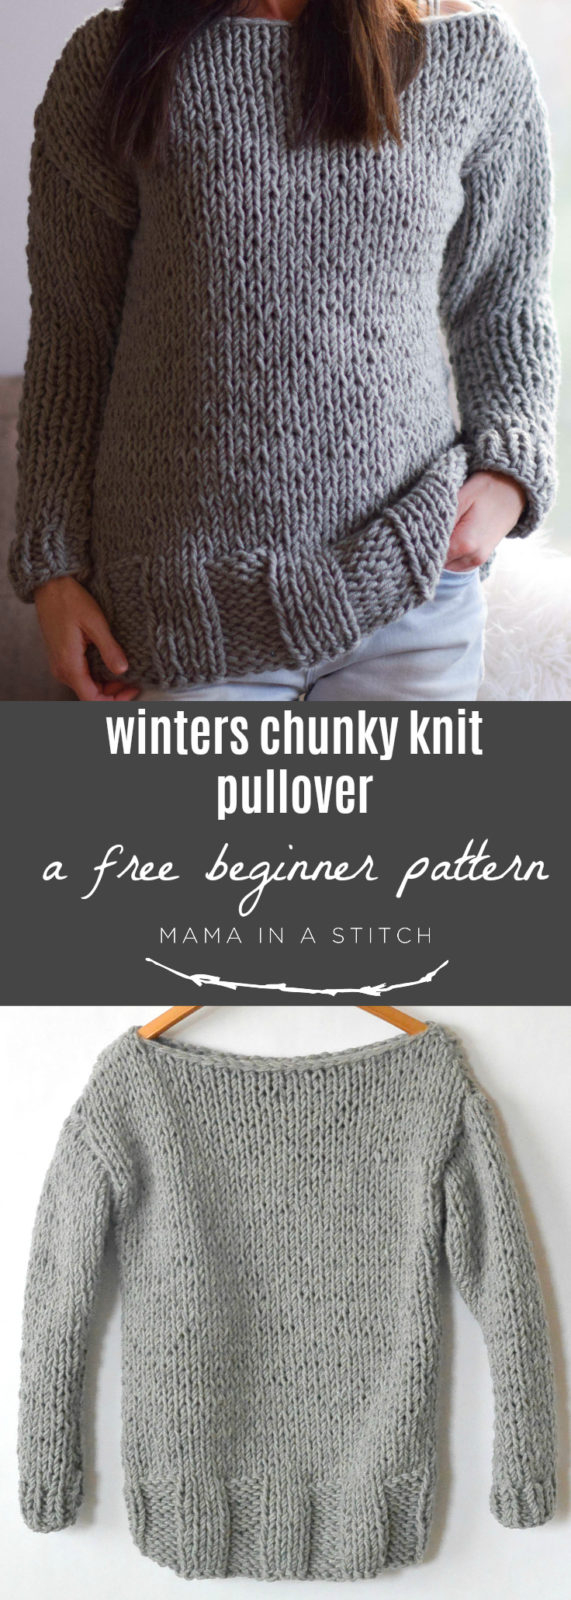 Knit Sweaters Patterns Winters Chunky Easy Knit Pullover Pattern Mama In A Stitch